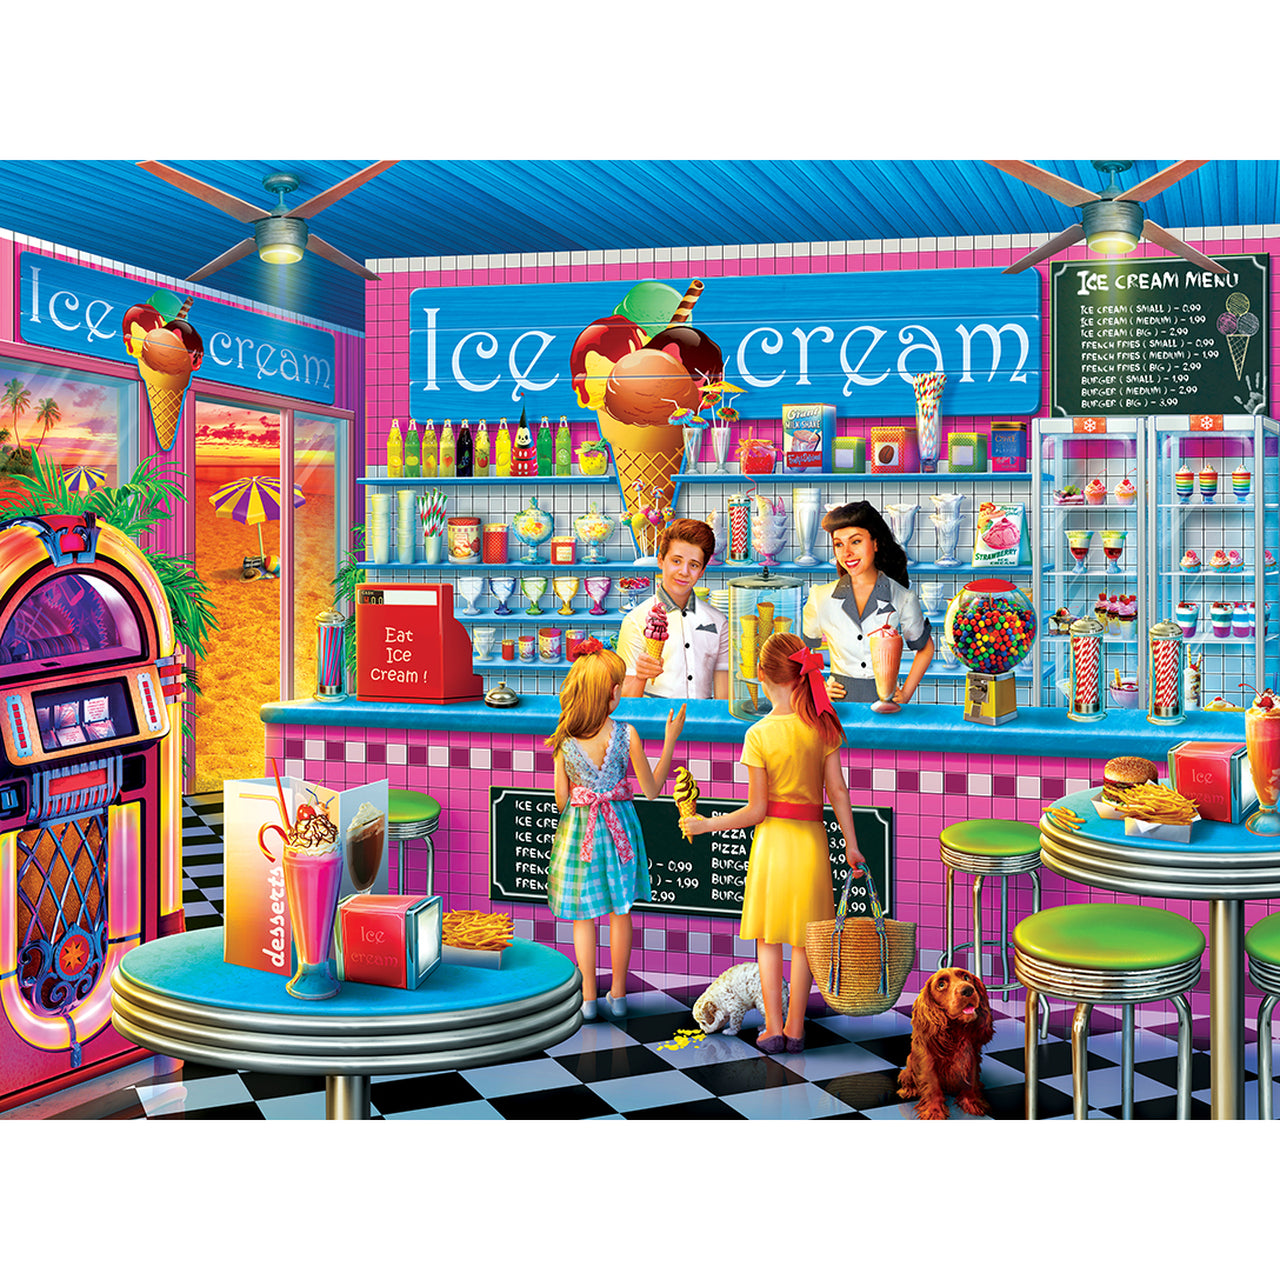 Shopkeepers Anna's Ice Cream Parlor 750 Piece Jigsaw Puzzle by Masterpieces